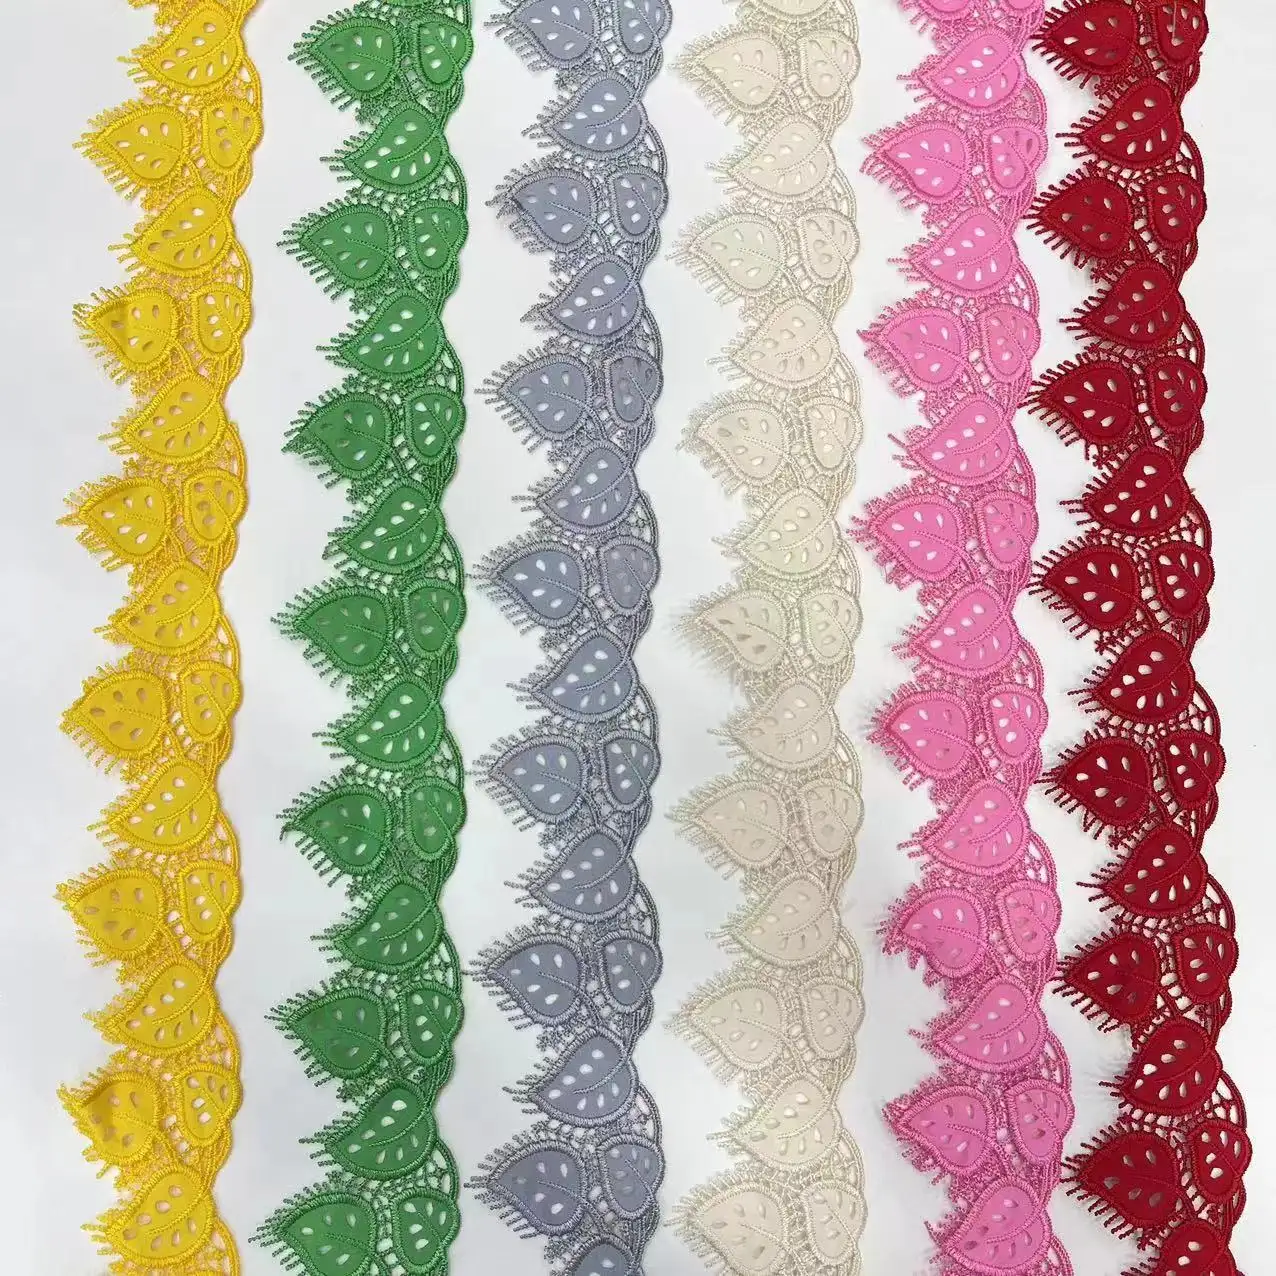 ZSY Embroidery trim Leaf design yarn polyester colored border lace trim flower guipure lace border